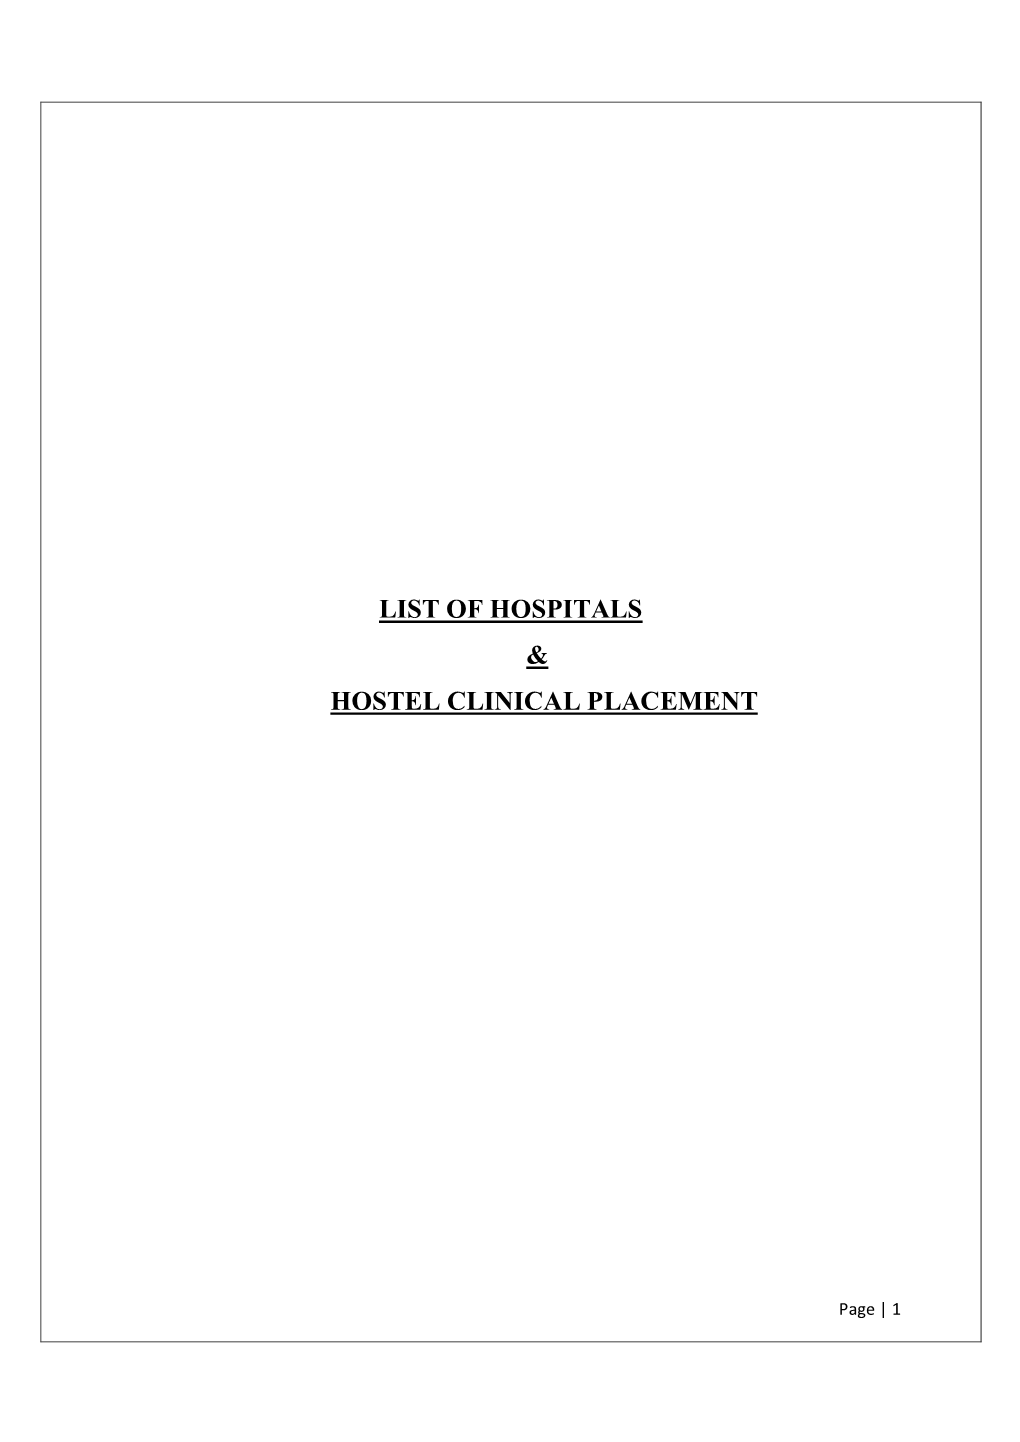 List of Hospitals & Hostel Clinical Placement